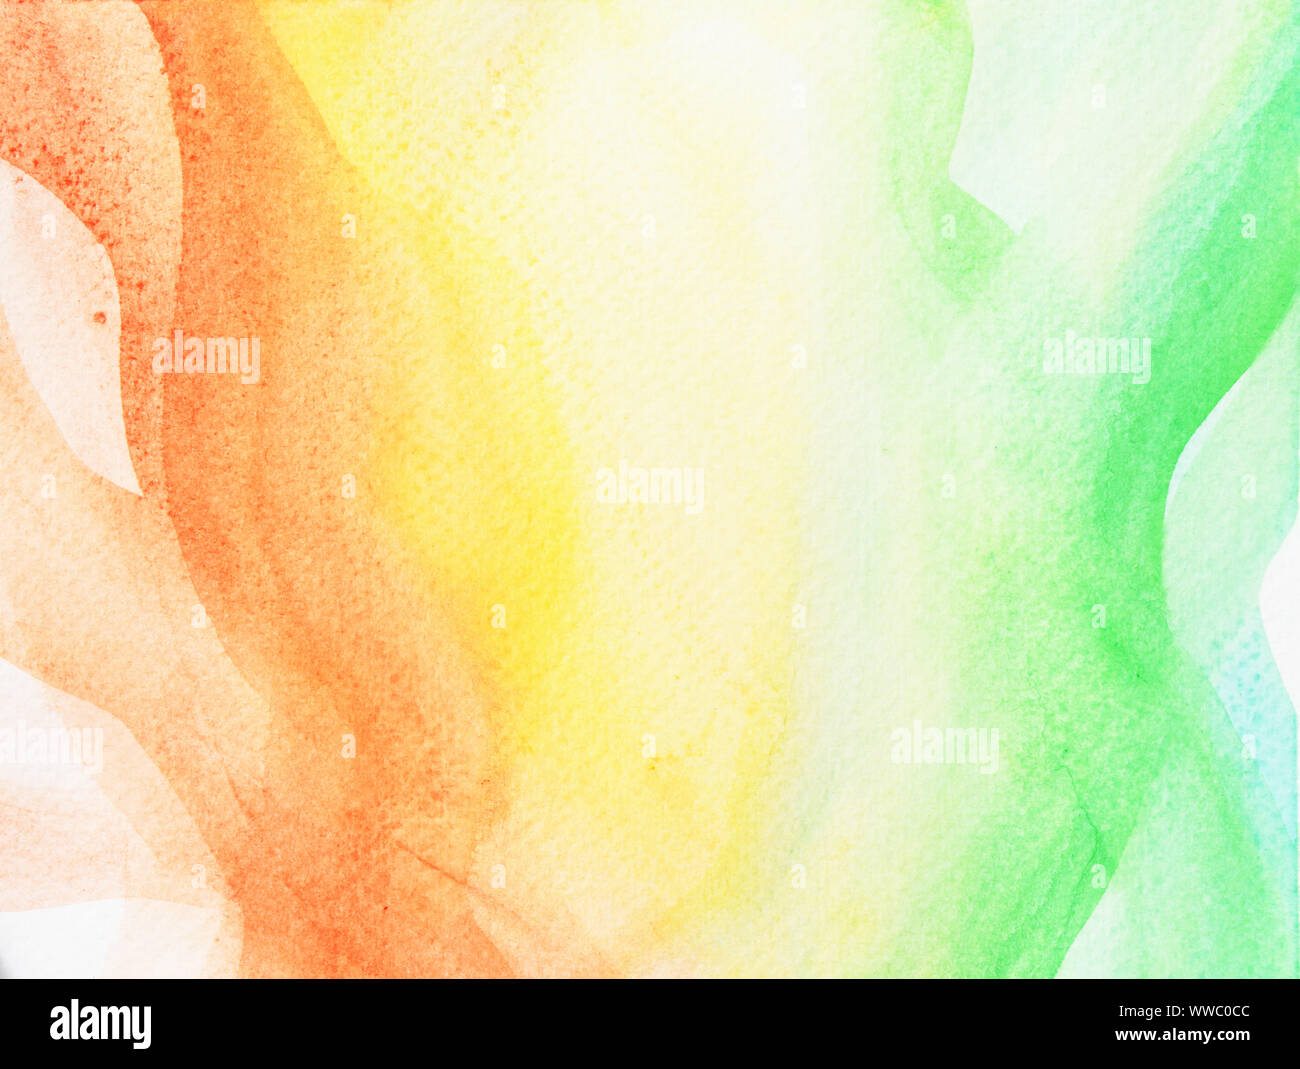 Colorful smoke, Abstract pattern green with yellow and orange color , Illustration watercolor hand draw and painted on paper Stock Photo